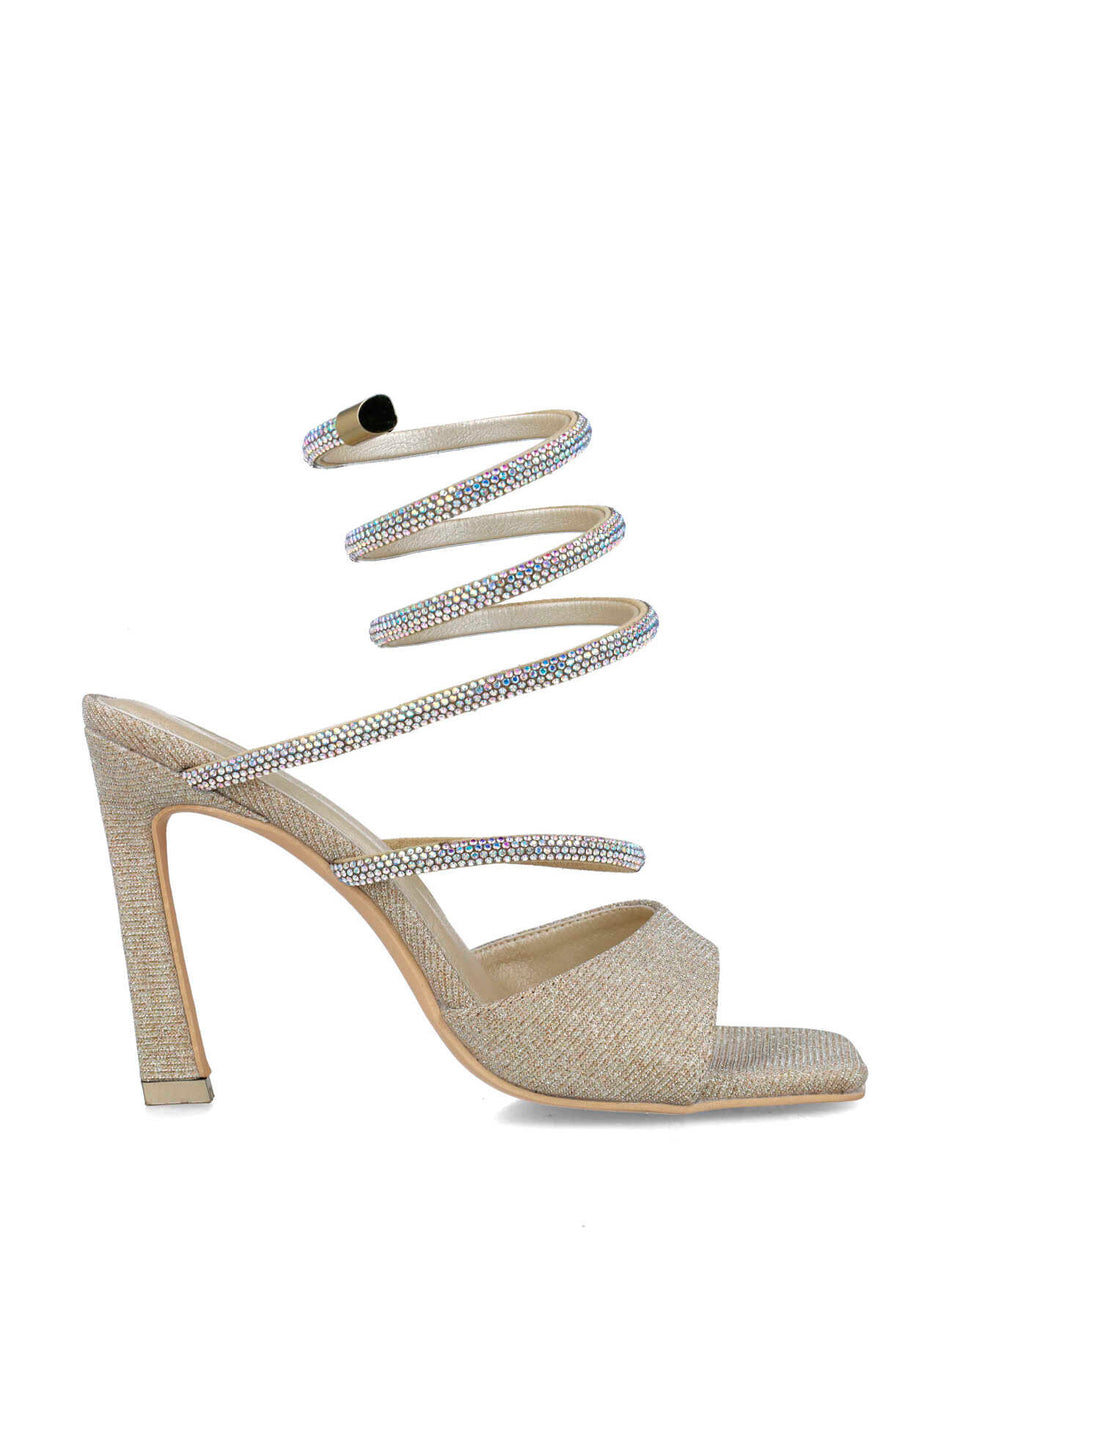 Gold Sandals With Embellished Wrap Strap_24712_00_01